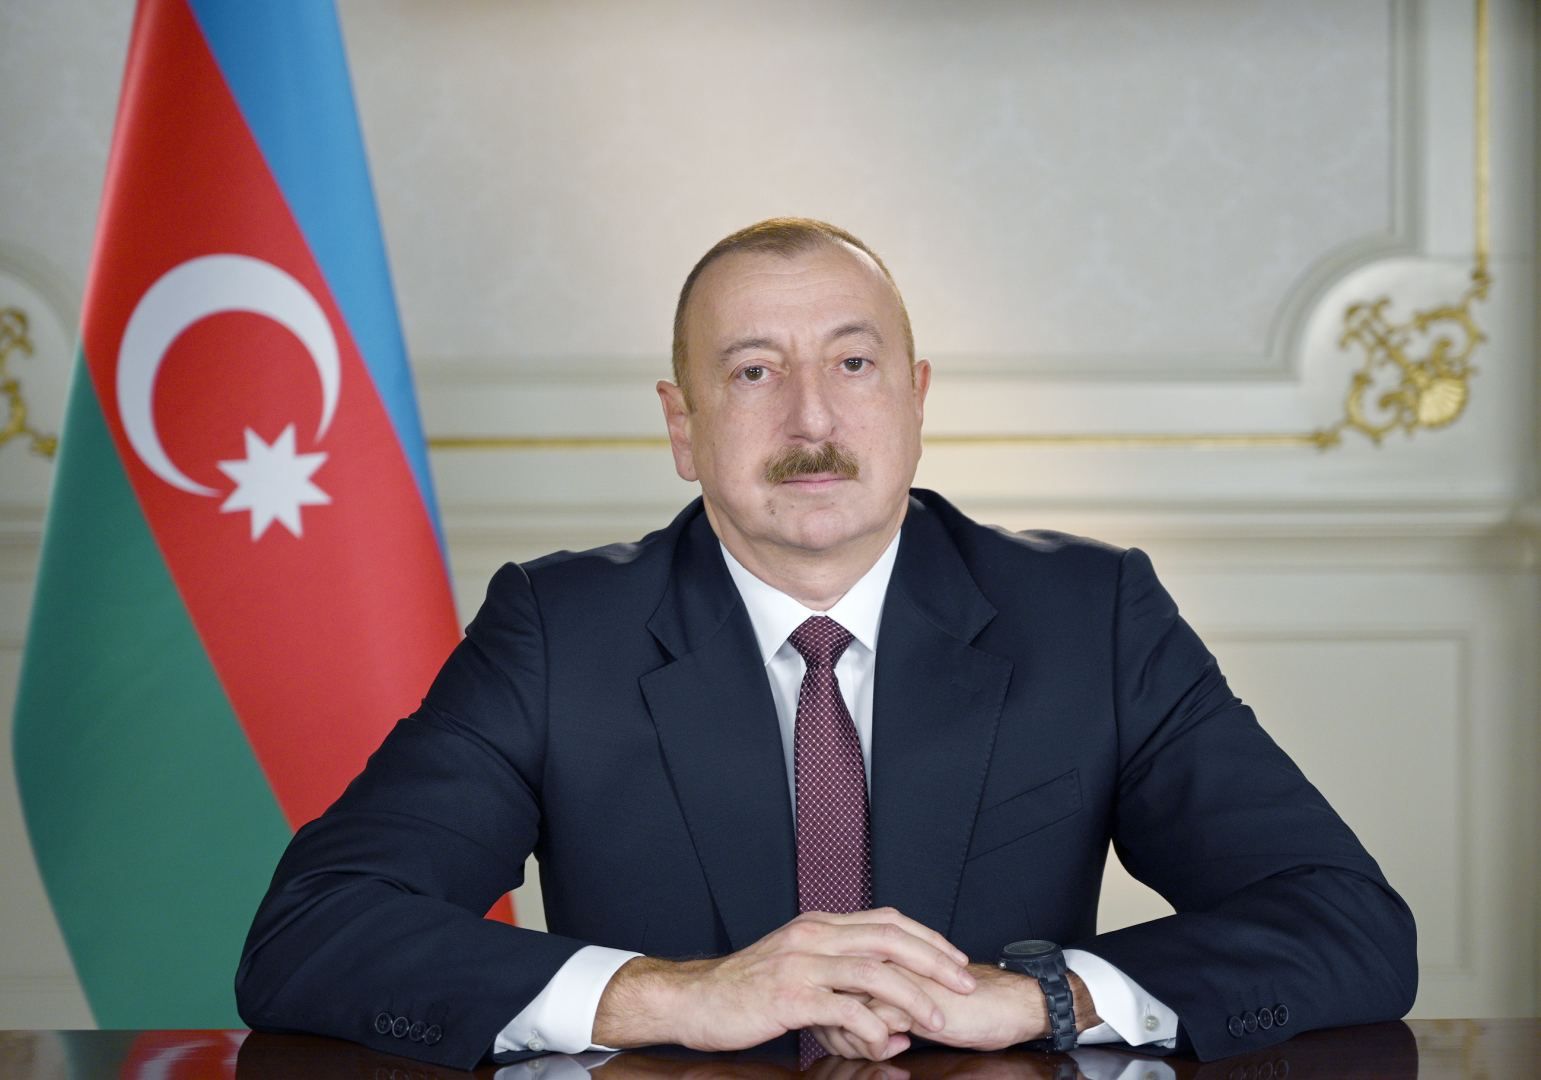 President Ilham Aliyev expresses condolences to President of Serbia, following armed incident in school in Belgrade